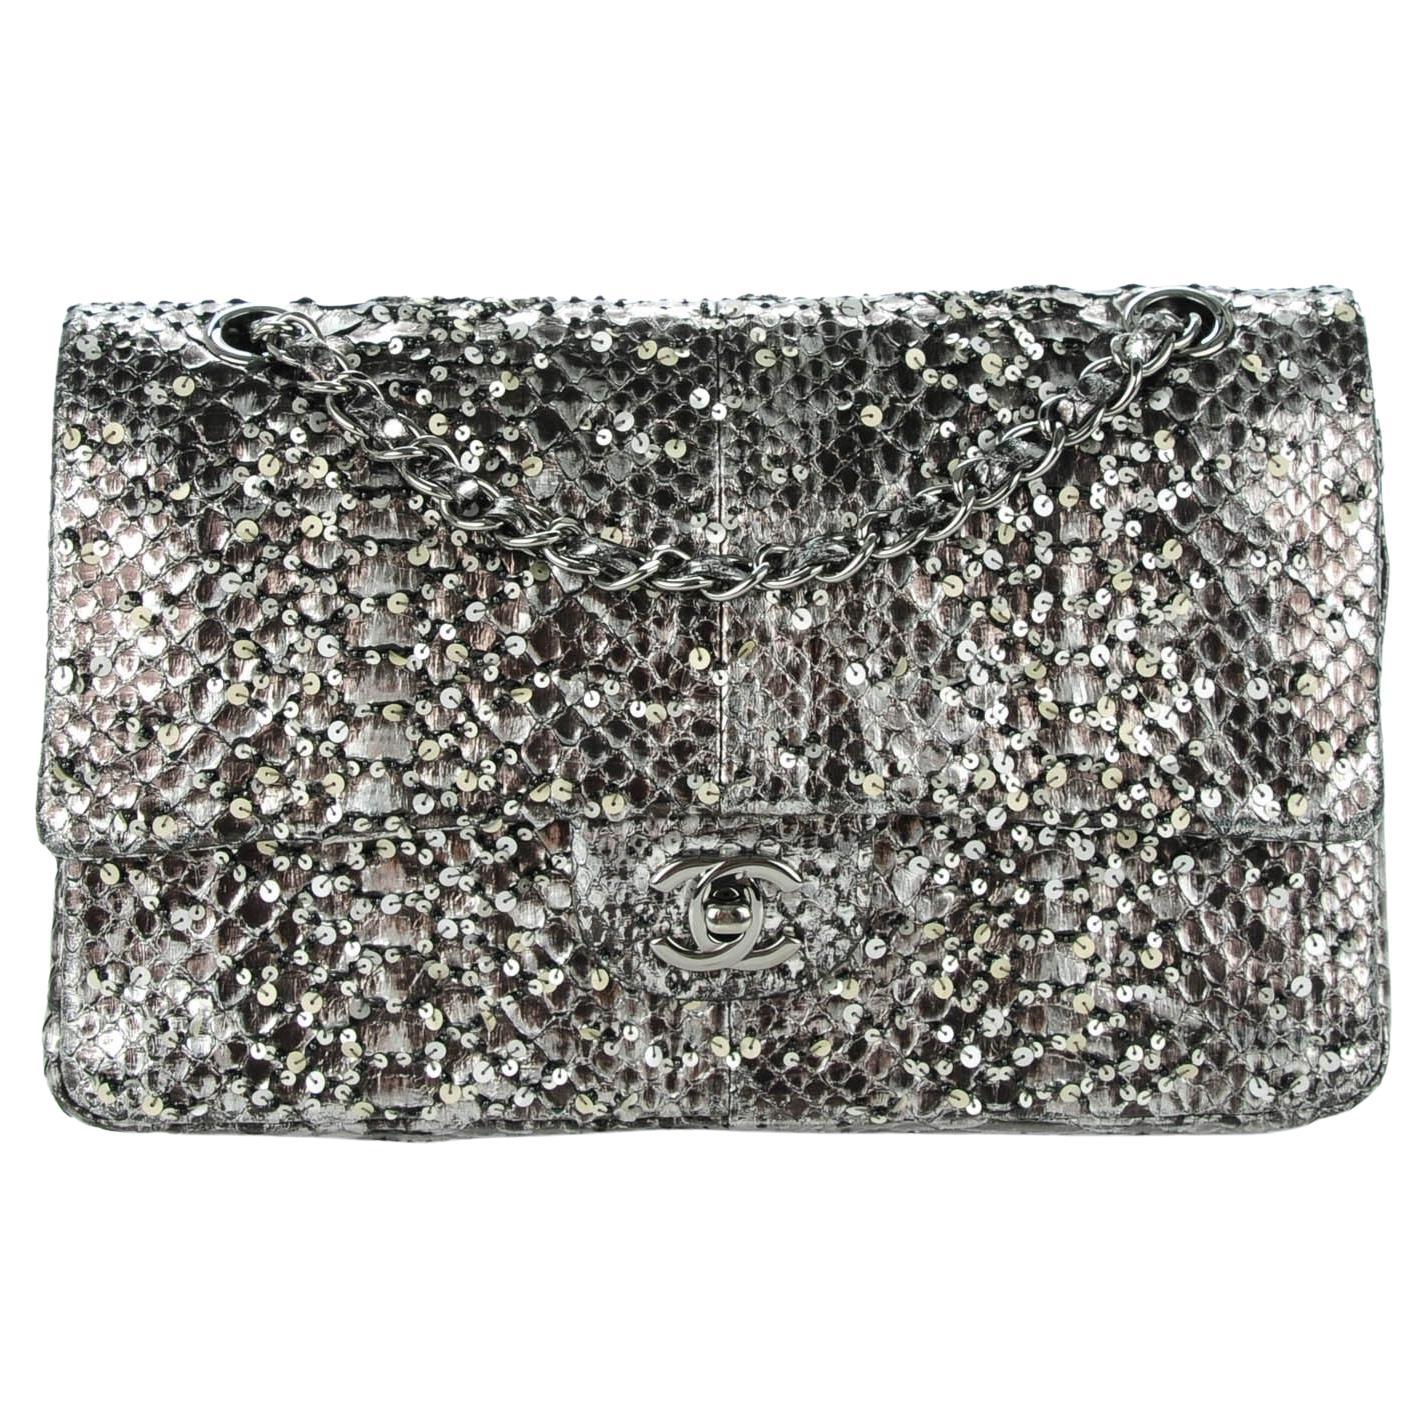 Charcoal grey Chanel python skin classic flap with sequin and beads.

Year: 2011
Silver hardware
Classic CC Closure
Interior flap zipper
Interior flap
Interior open pockets
Engraved interior CHANEL plaque
10